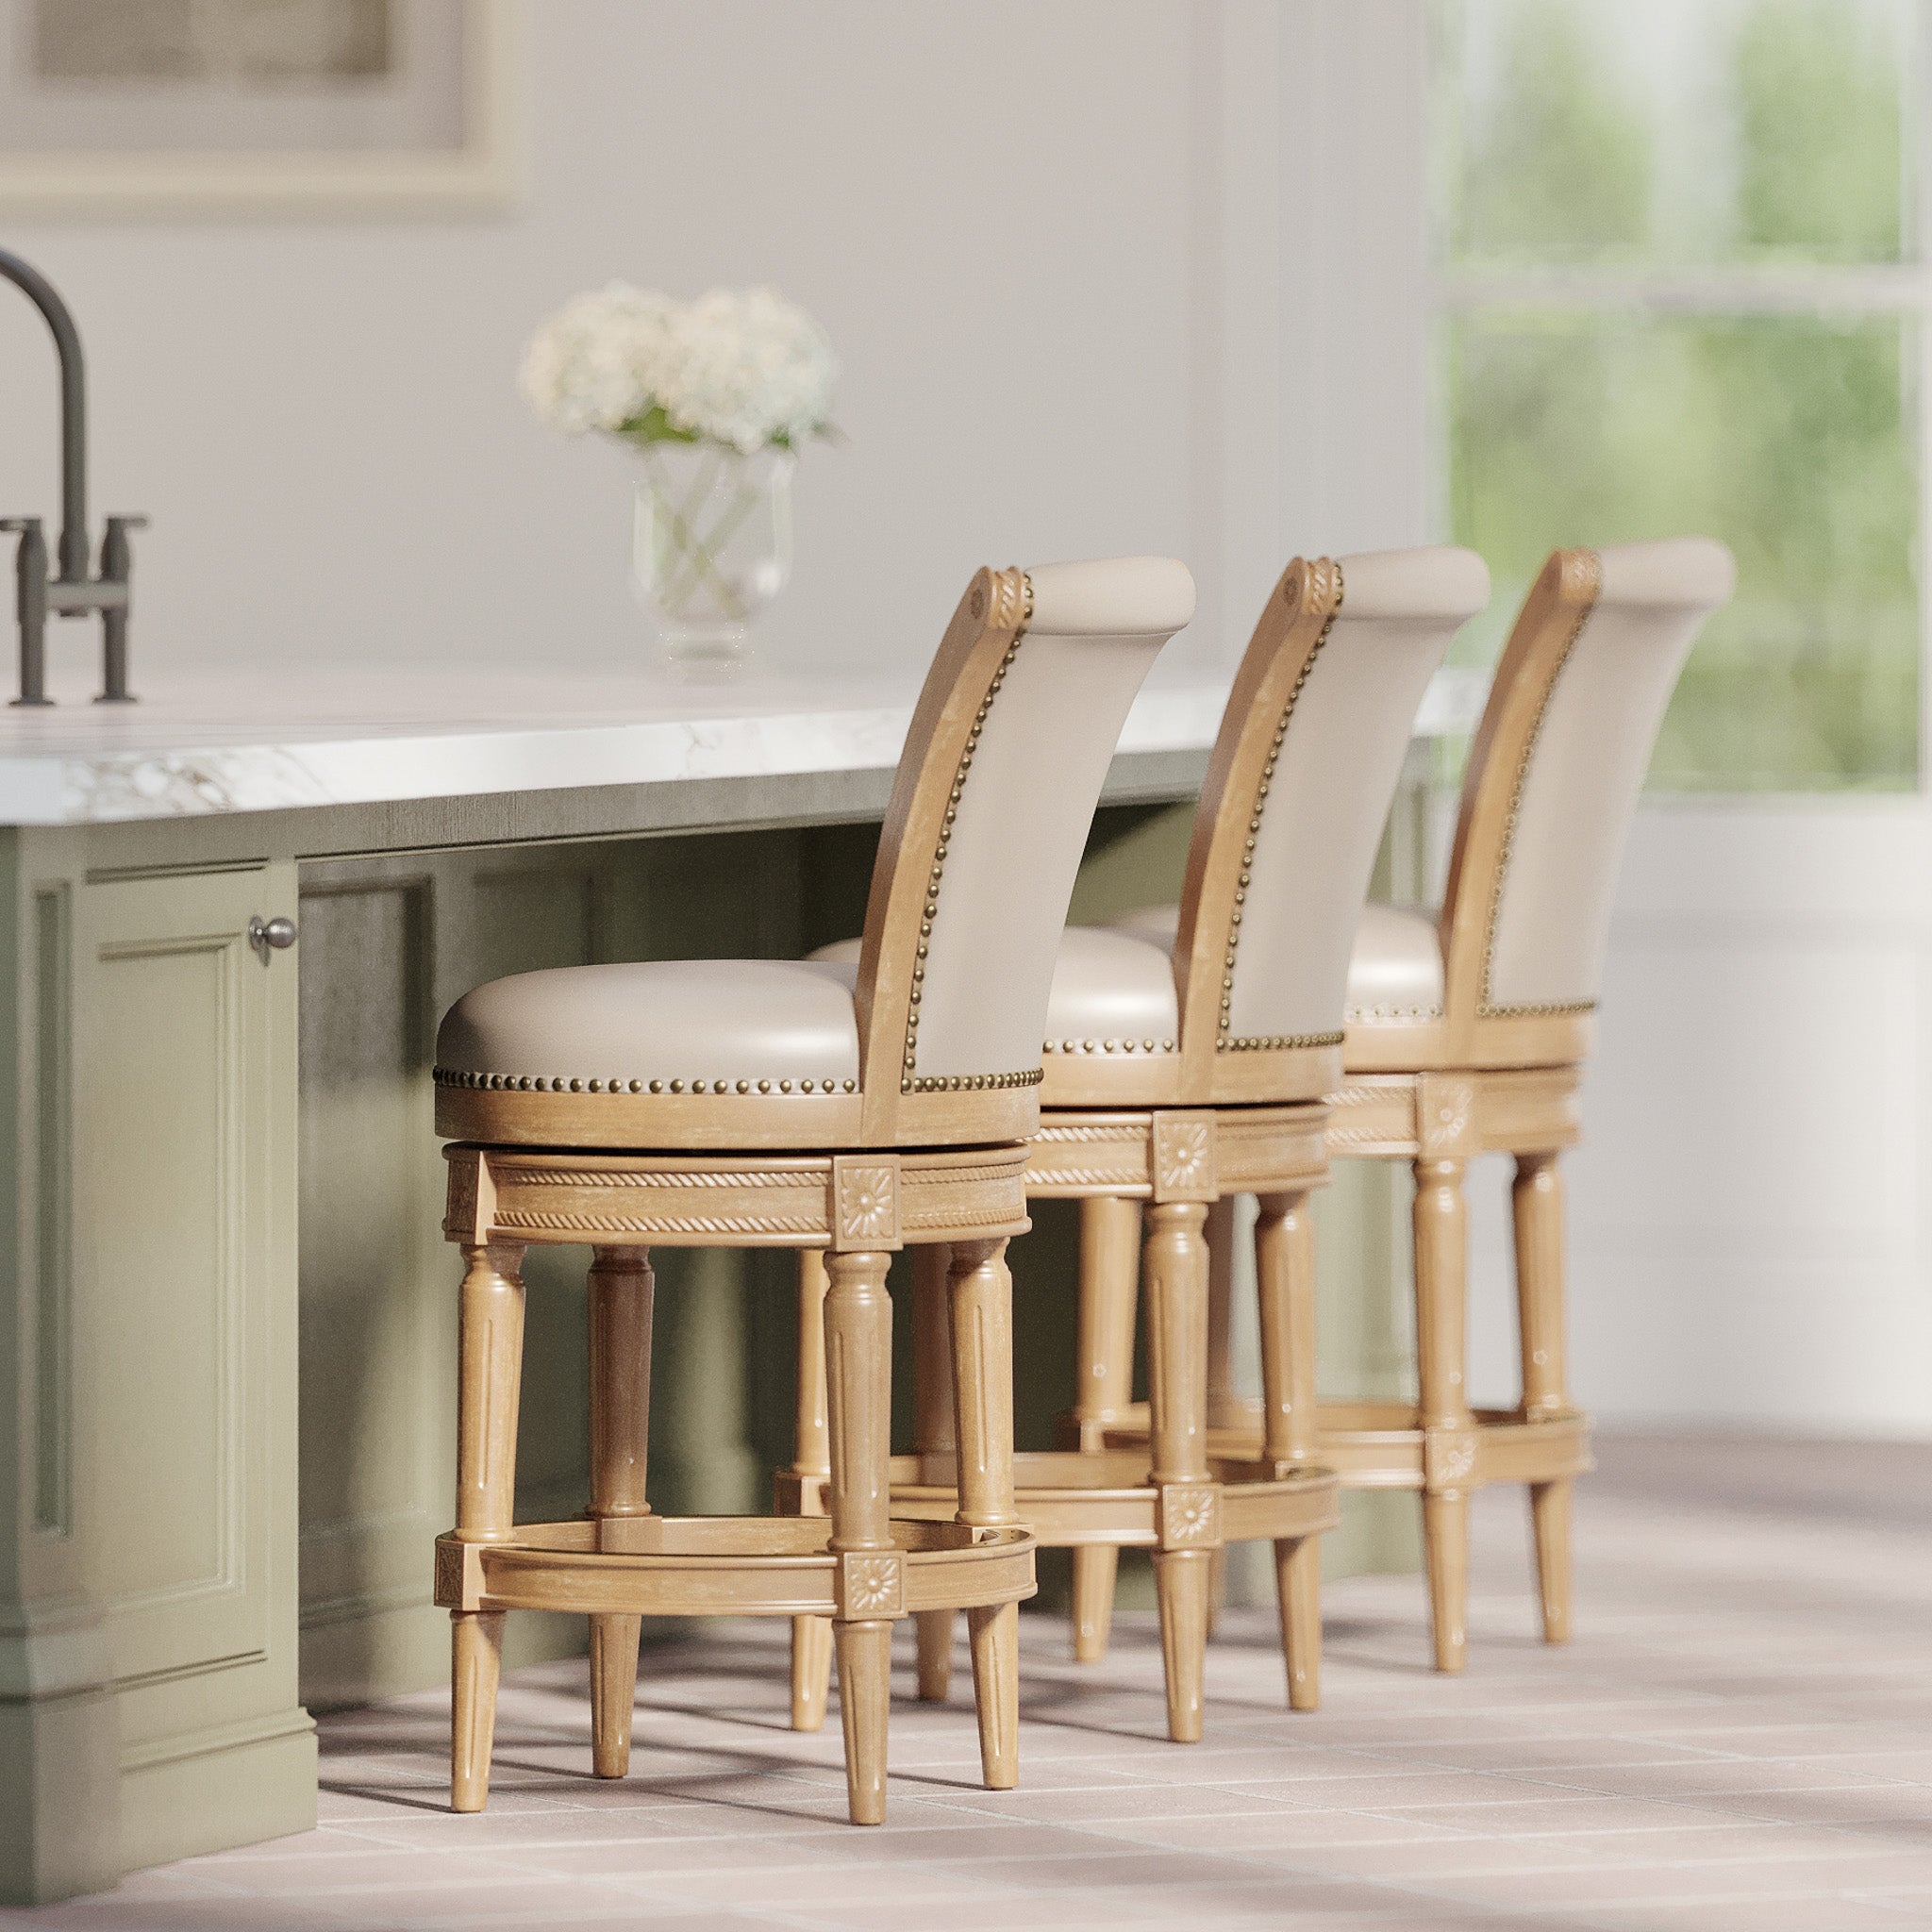 Pullman Counter Stool in Weathered Oak Finish with Avanti Bone Vegan Leather in Stools by Maven Lane